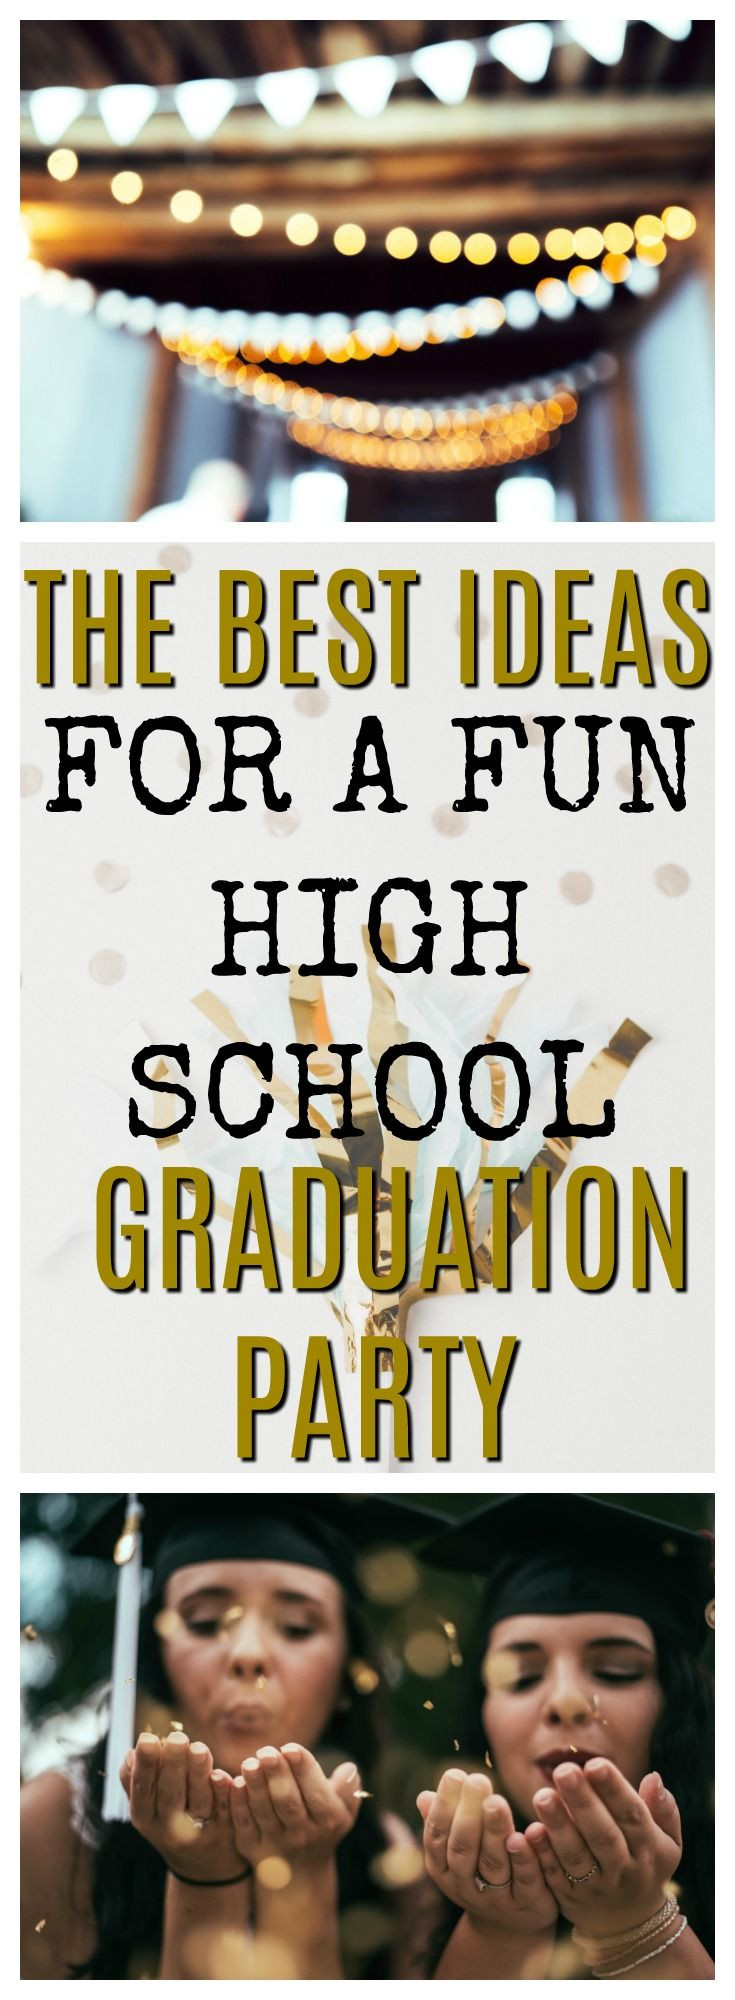 Simple High School Graduation Party Ideas
 Graduation Party Ideas 2020 How to Celebrate [step by